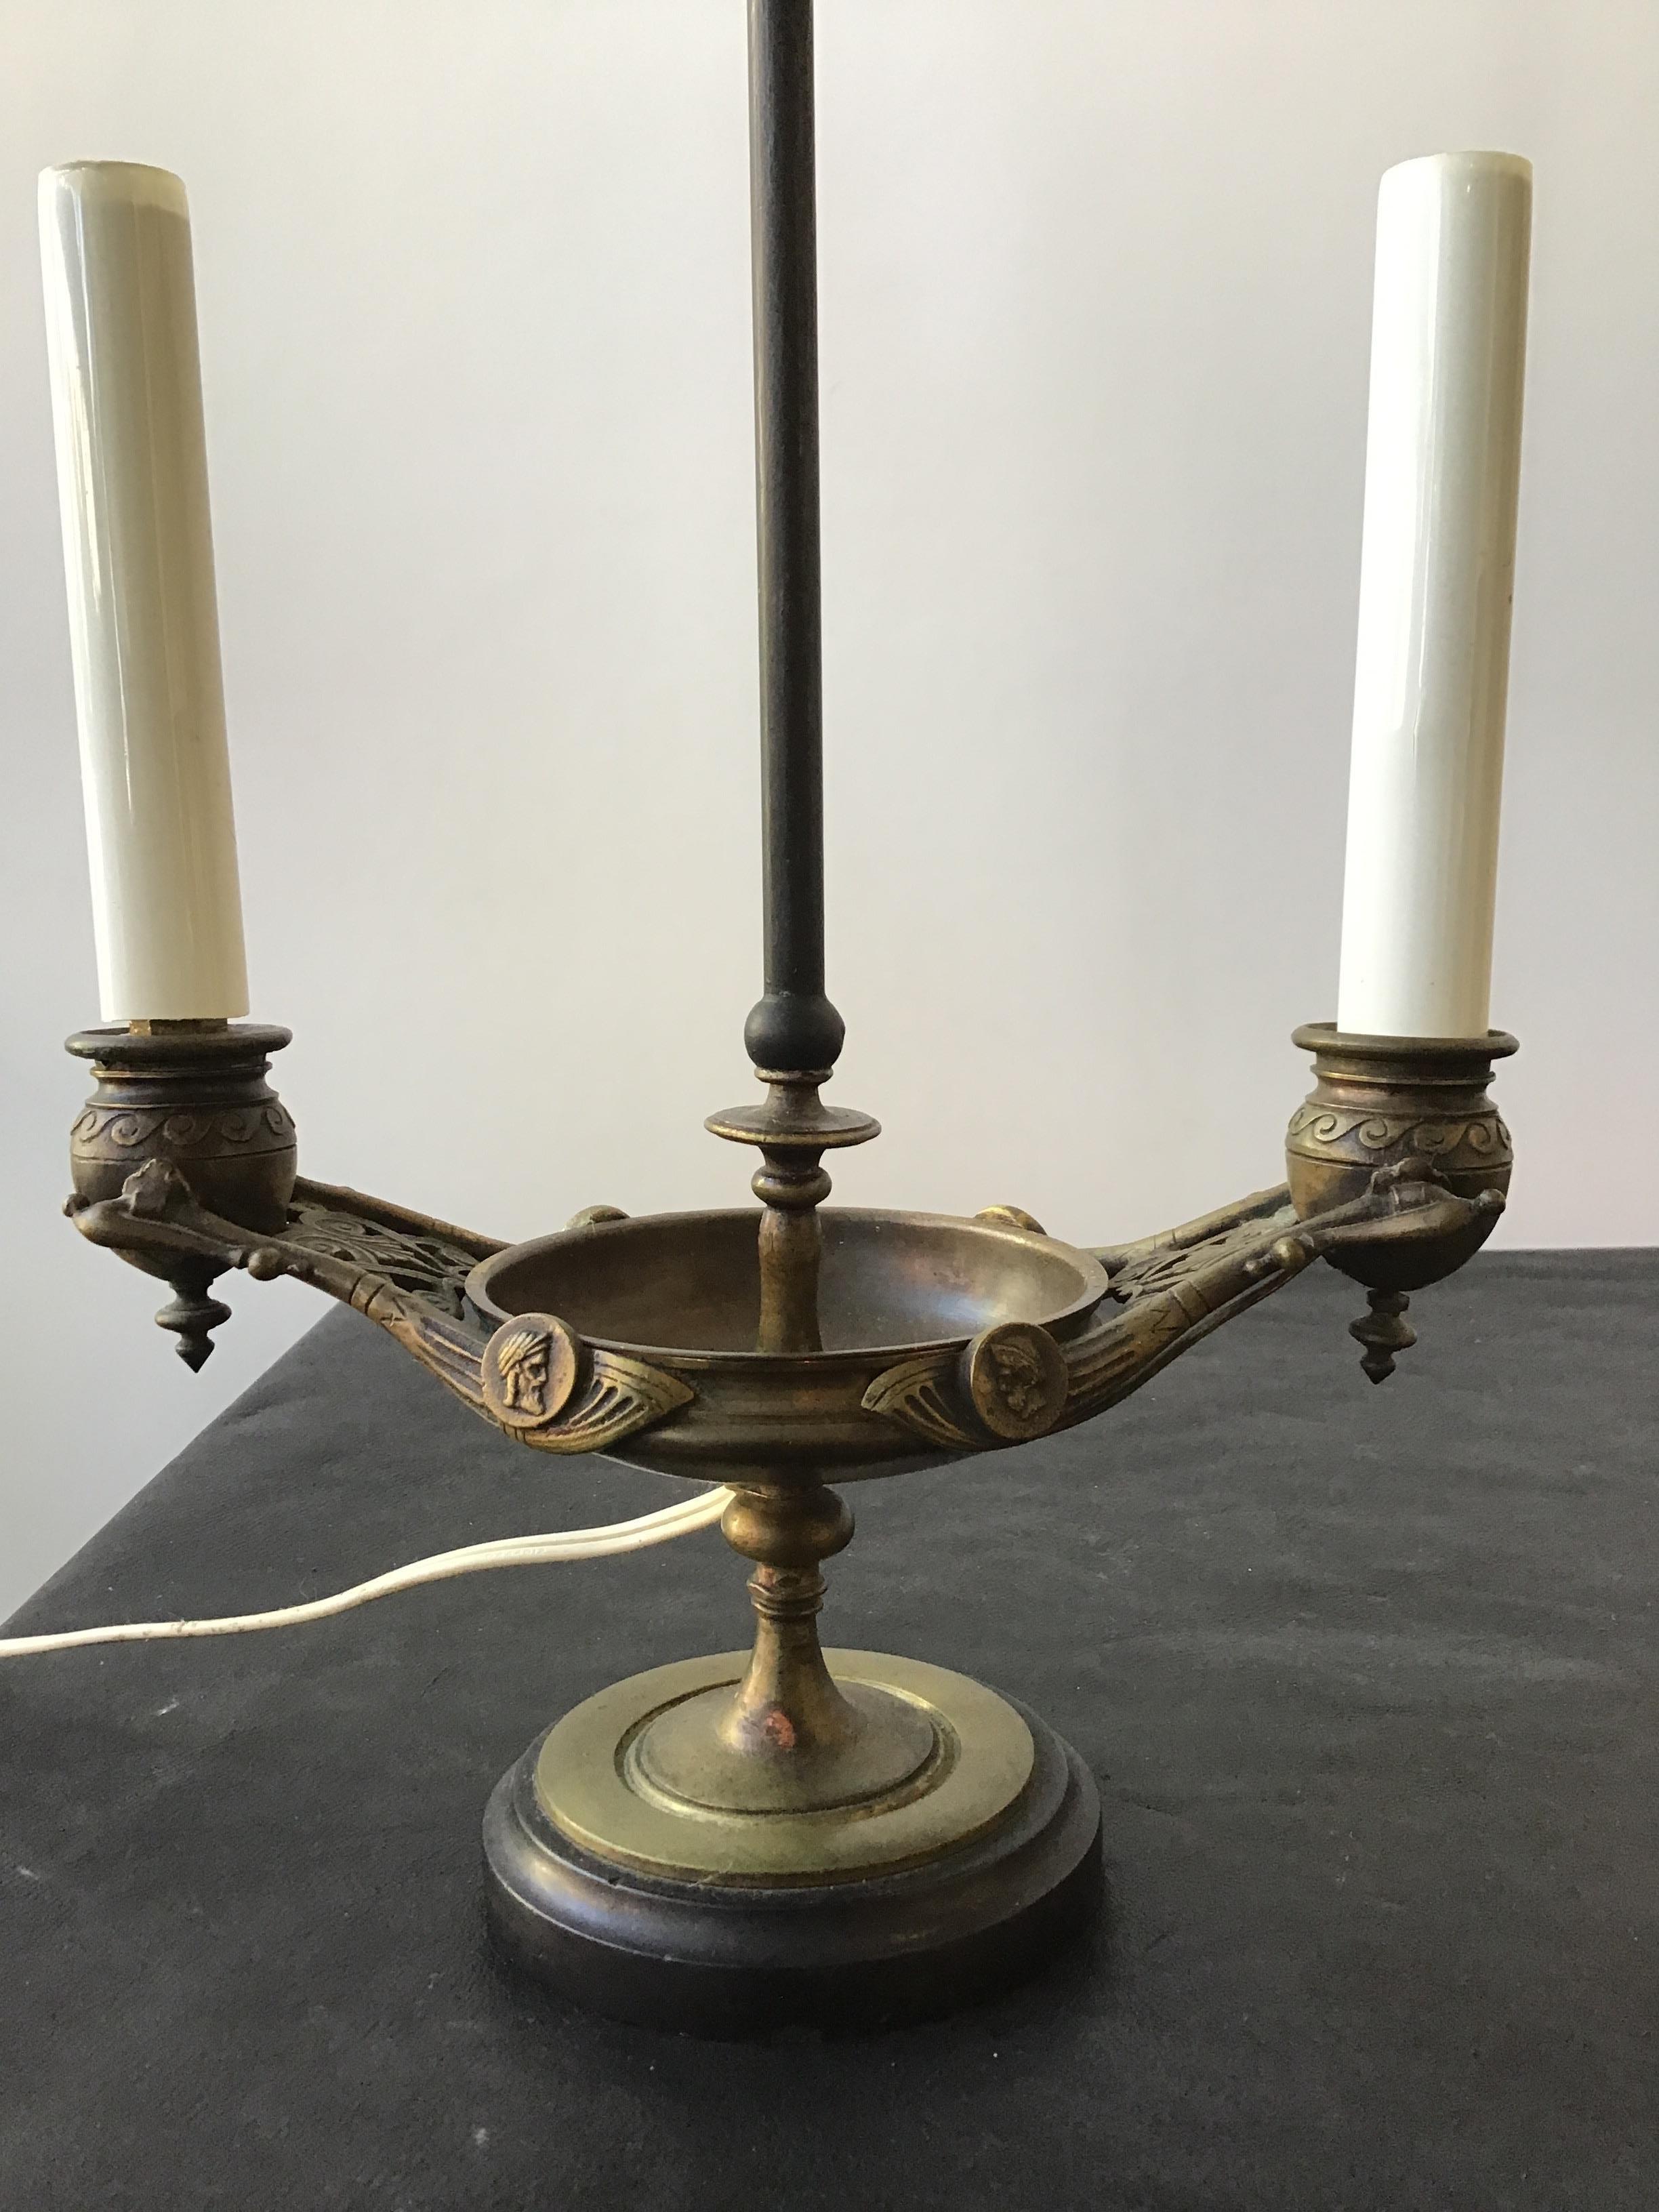 1870s bronze oil lamp. Great finial with face.